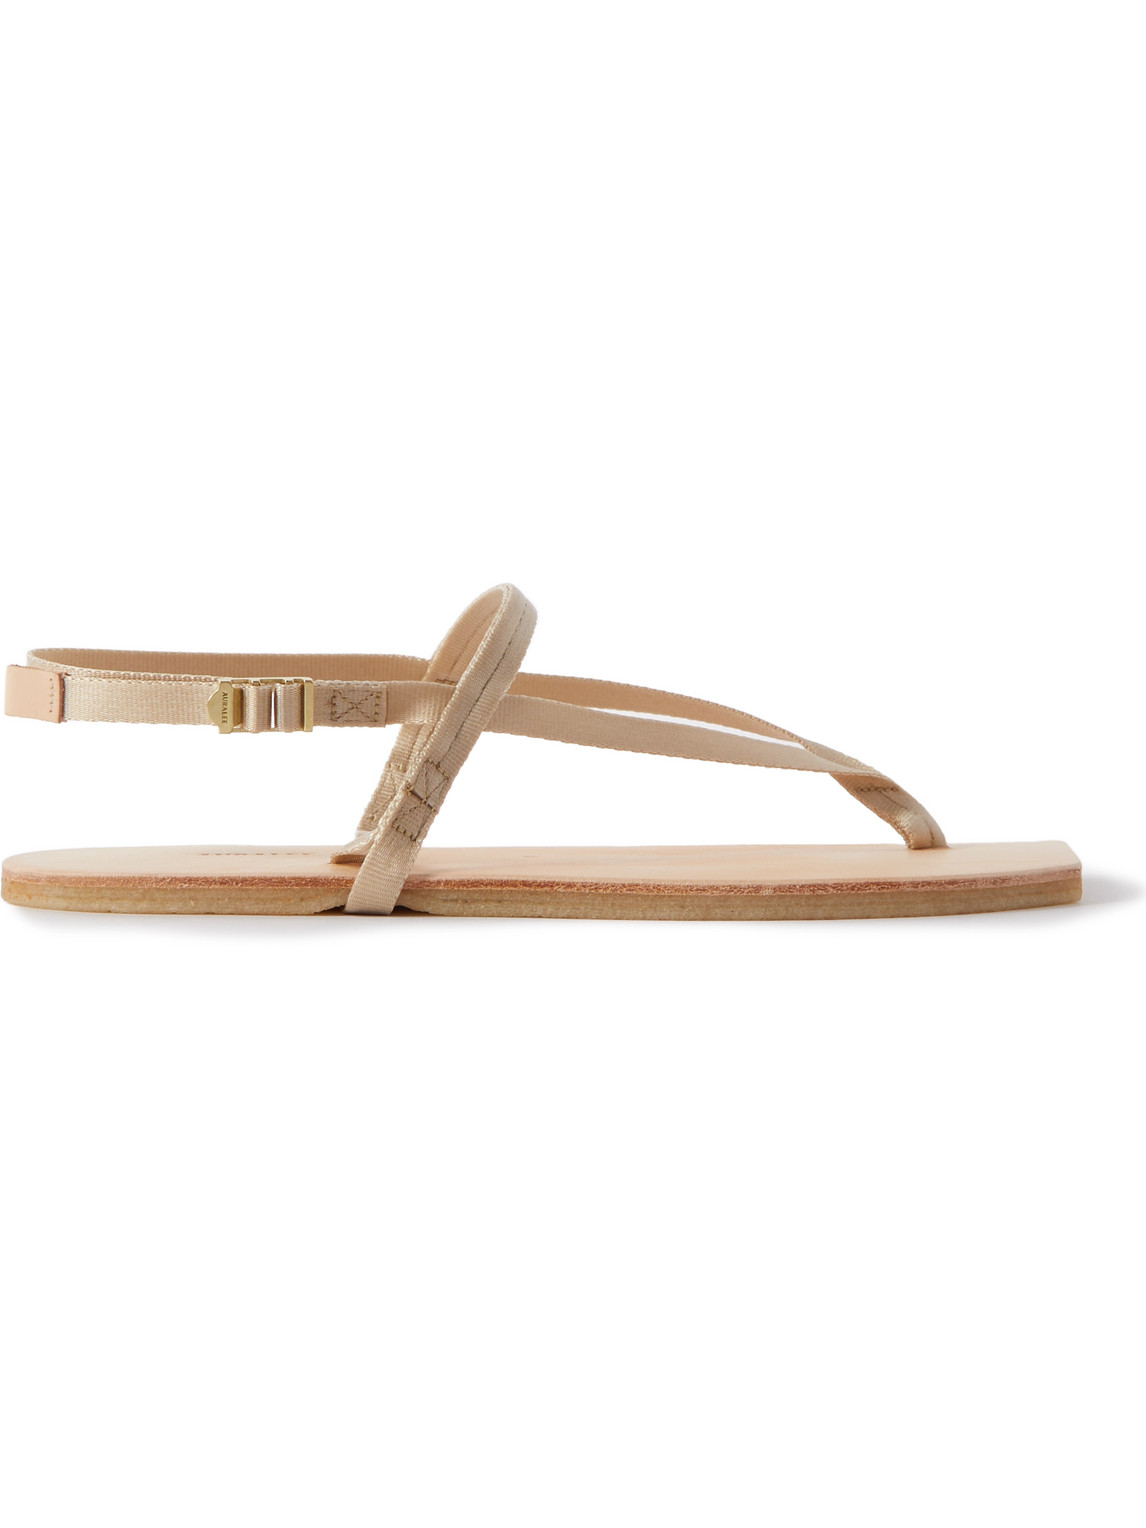 Foot the Coacher Nylon-Webbing and Leather Sandals